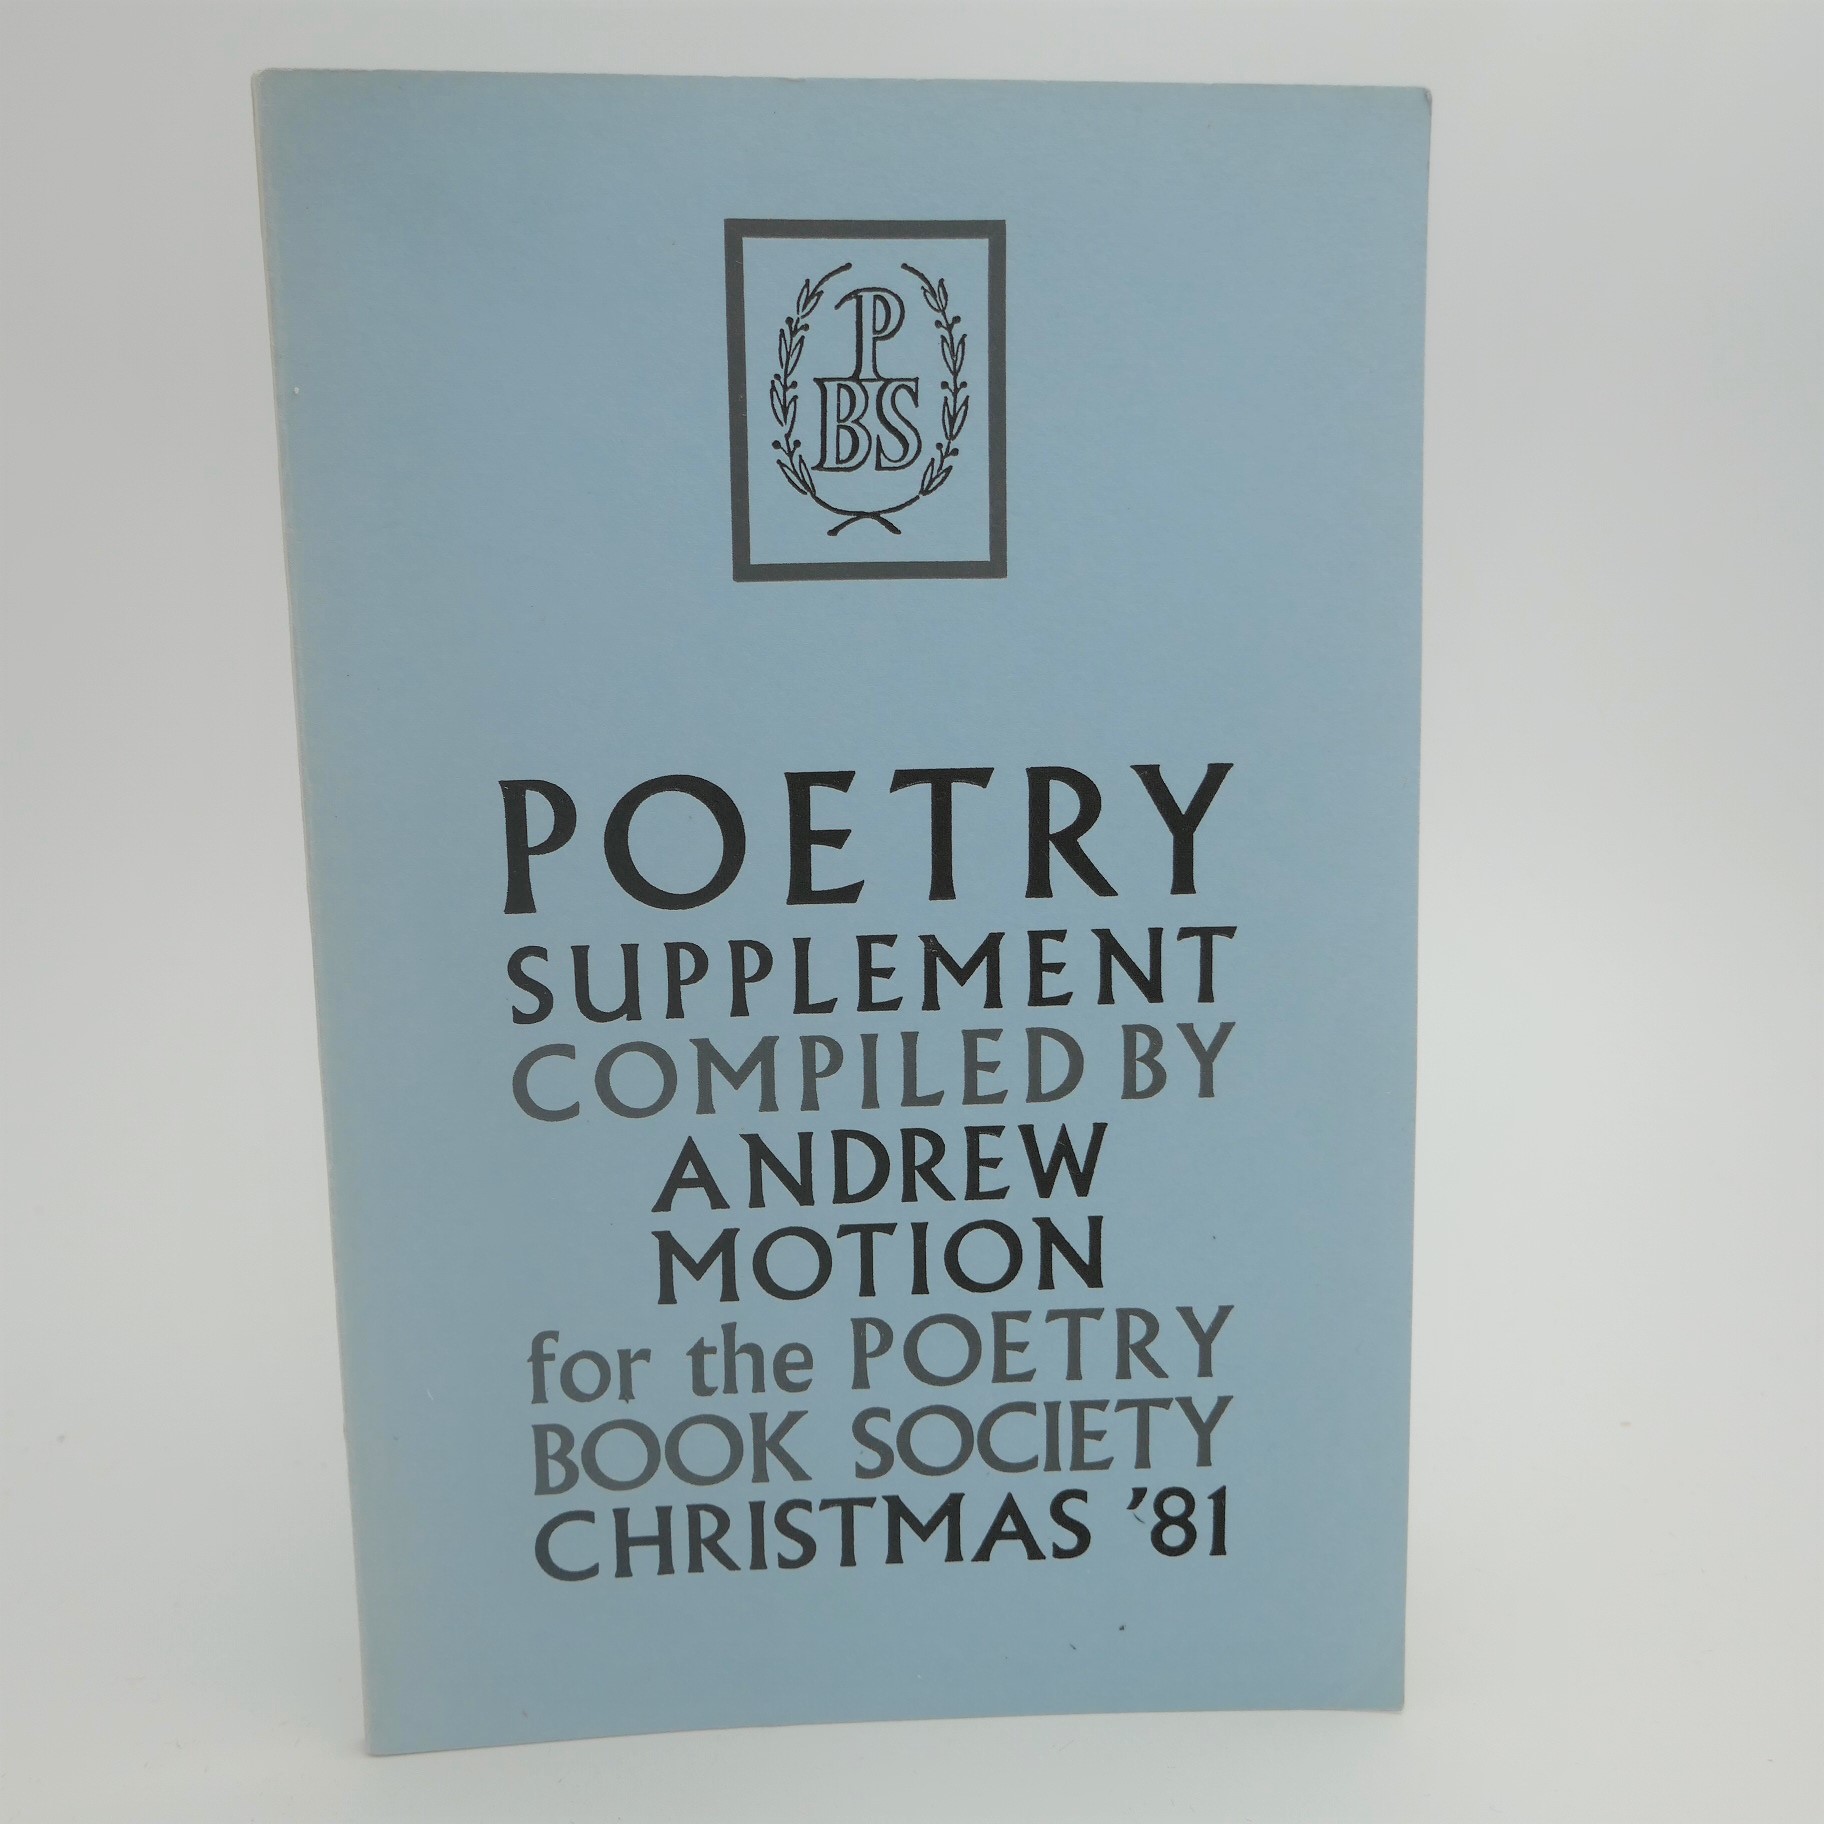 The Railway Children [in] Poetry Supplement. Signed Copy (1981) by Seamus Heaney